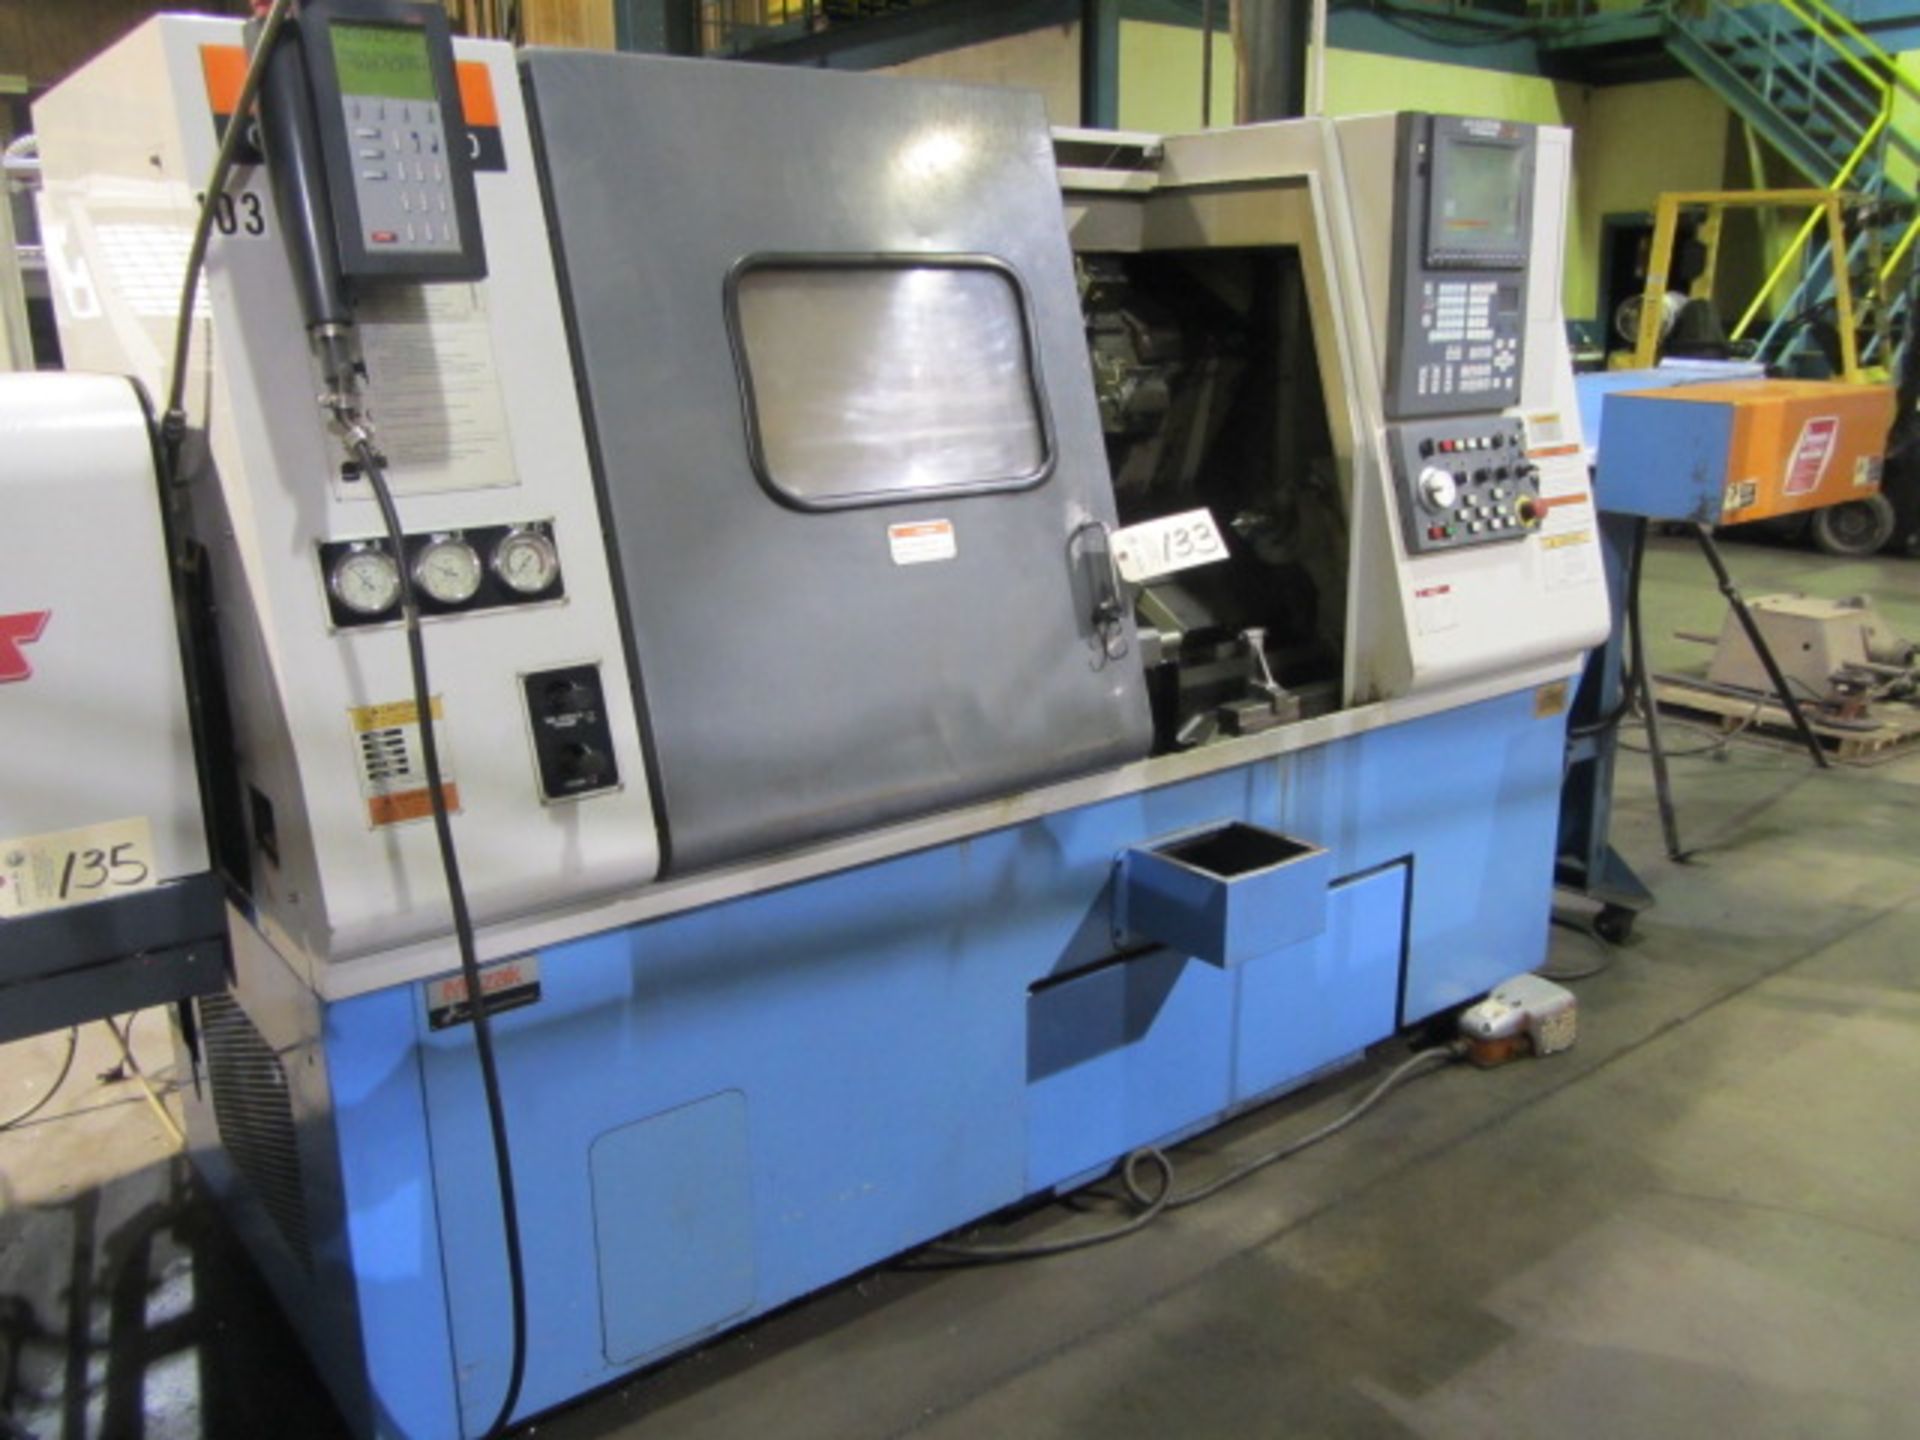 Mazak Model QT 250 CNC Turning Center with 3-Jaw Power Chuck, Collet Chuck, 24'' Centers to - Image 6 of 6